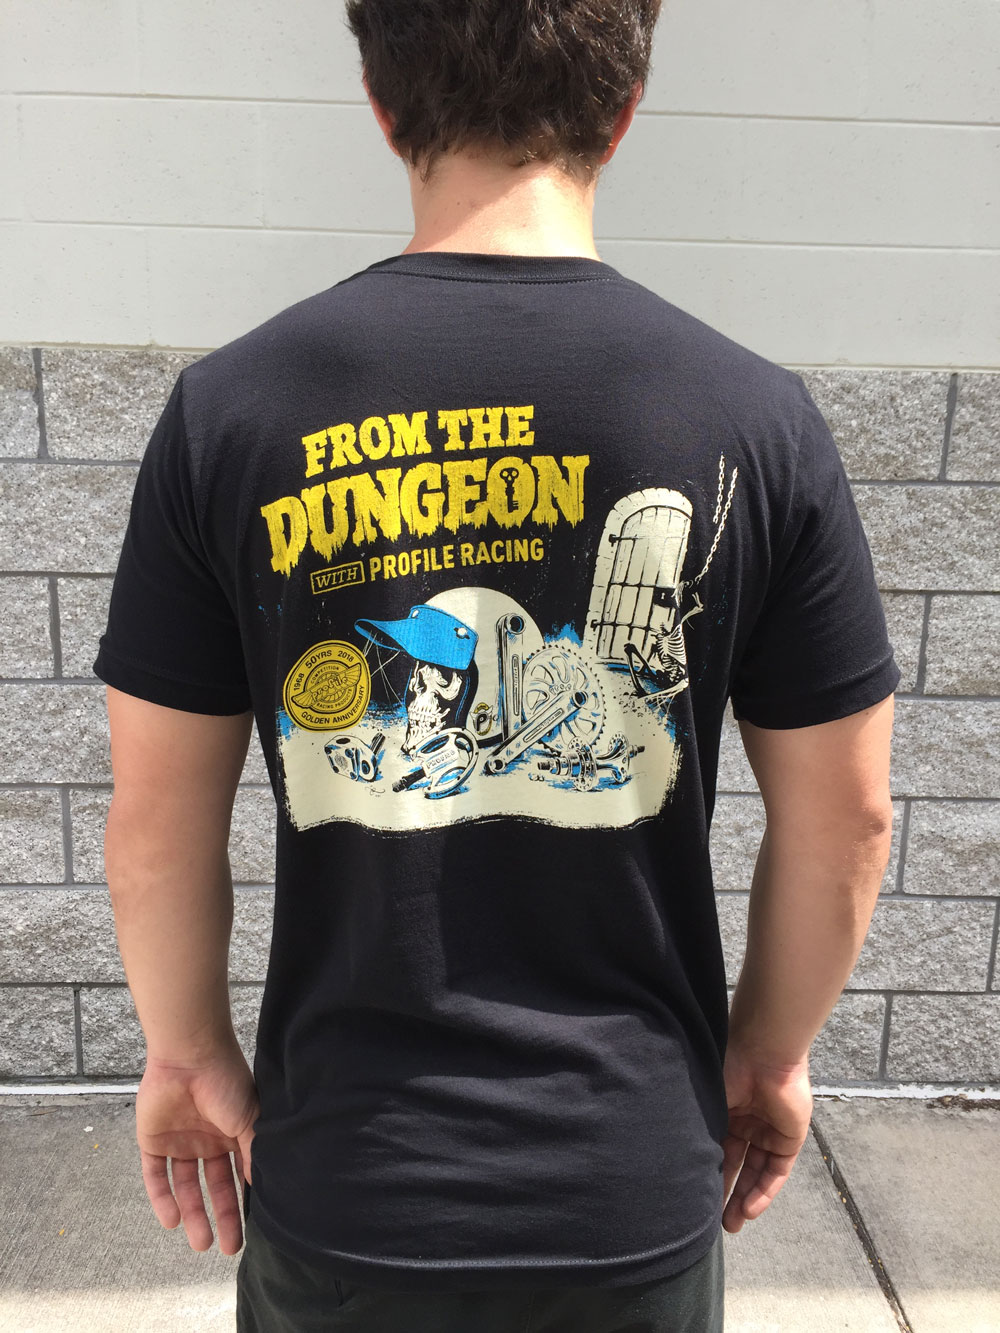 Profile "From the Dungeon" t-shirt